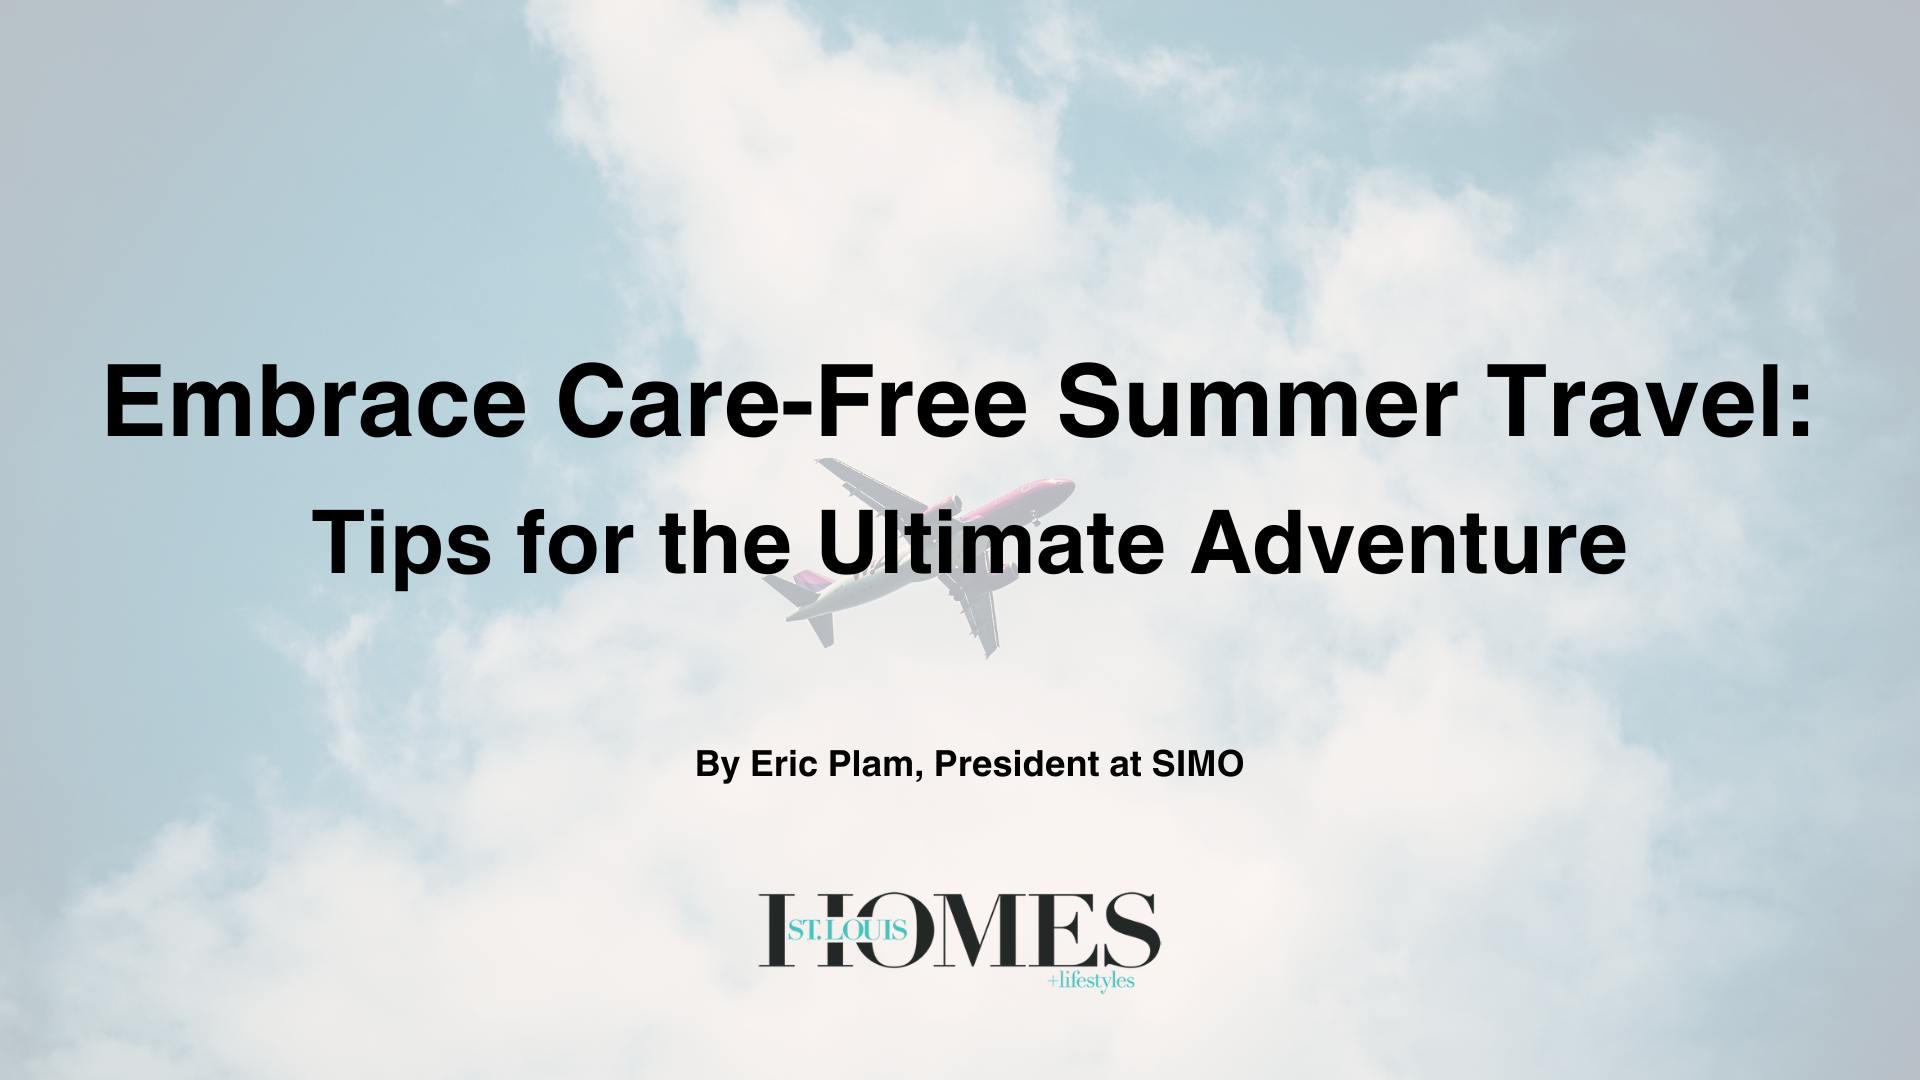 Embrace Care-Free Summer Travel: Tips for the Ultimate Adventure